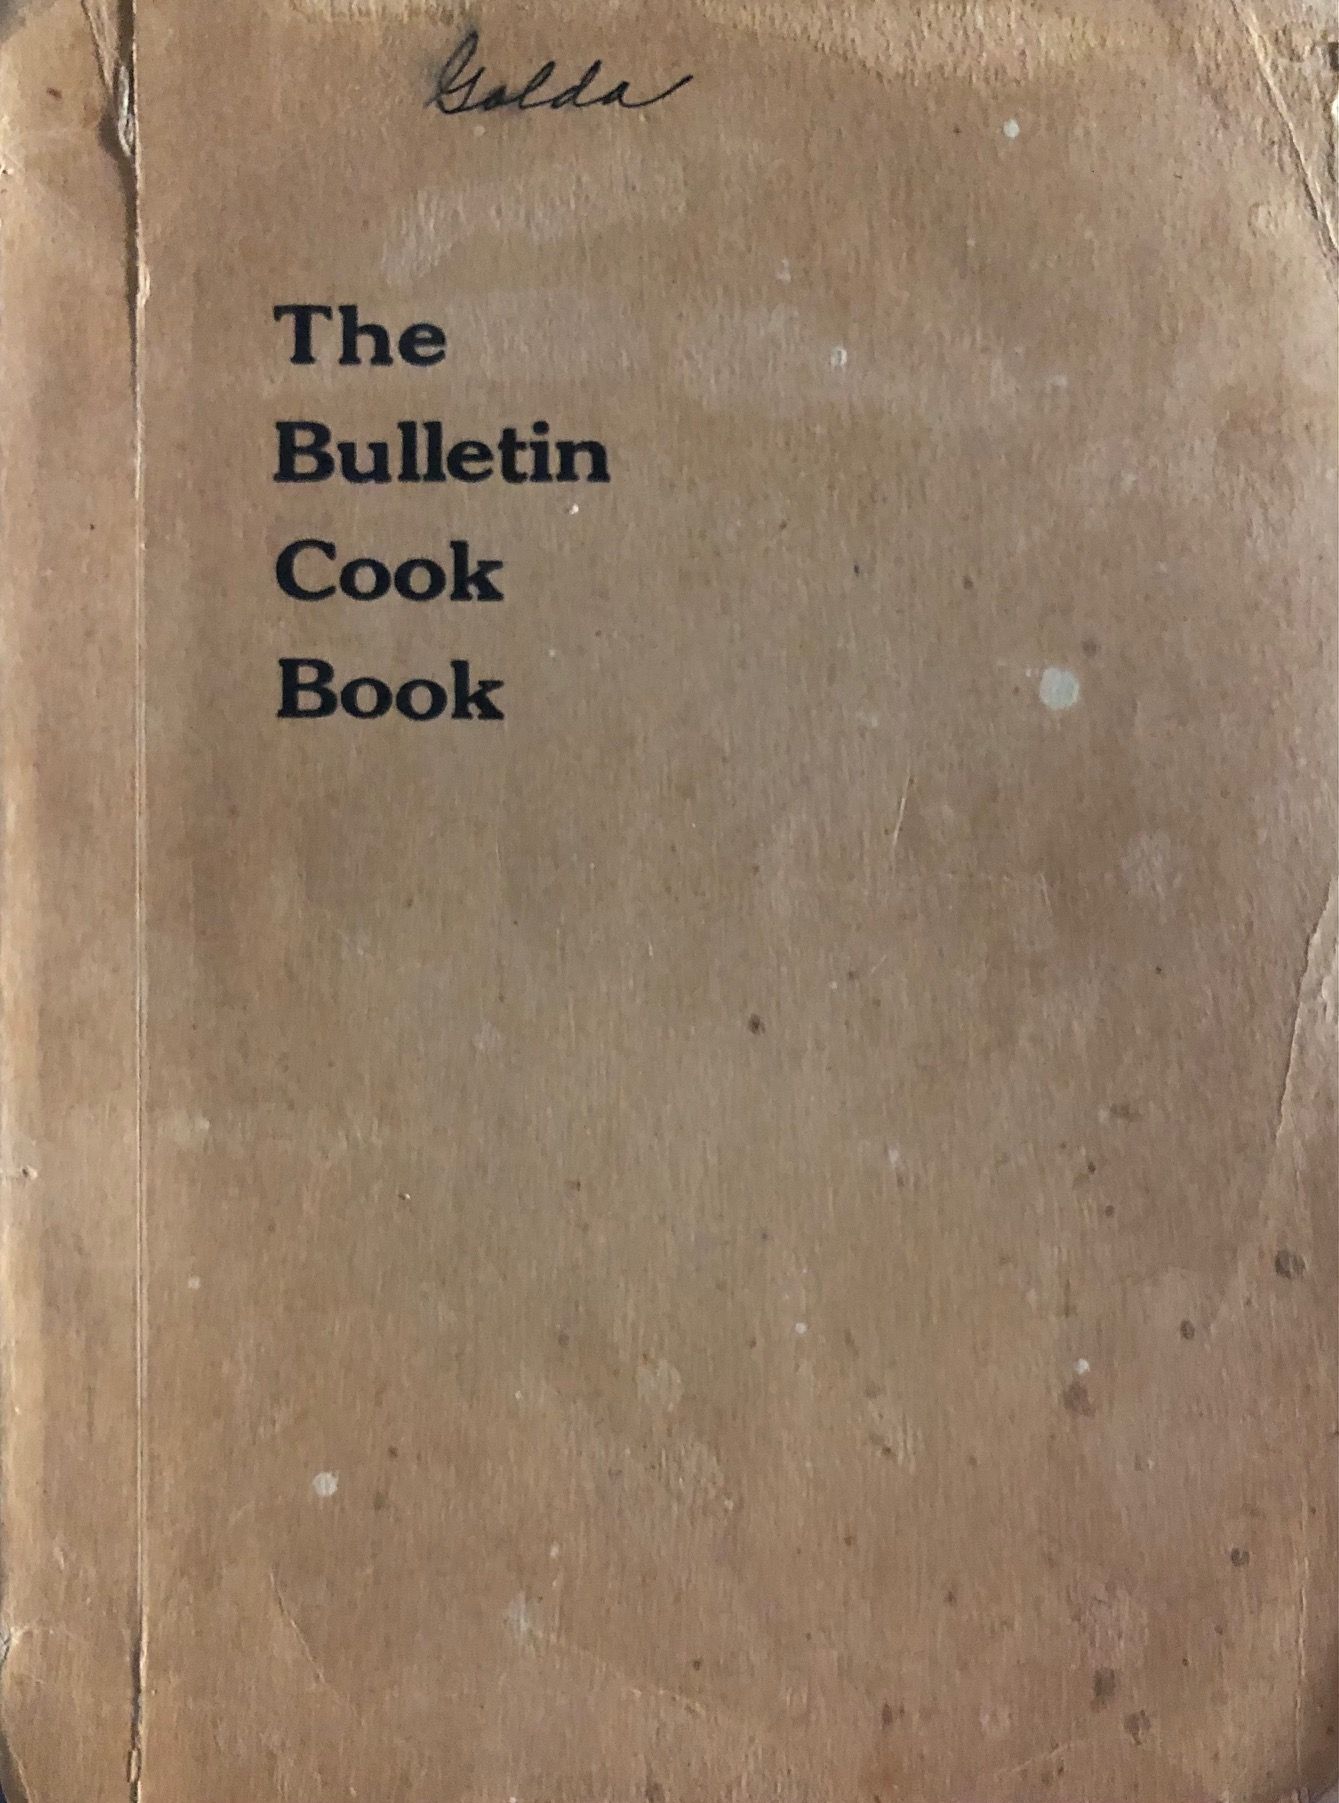 (Kansas) The Bulletin Cook Book: A Collection of Tested Recipes contributed by Readers and Friends of the Old Home Paper